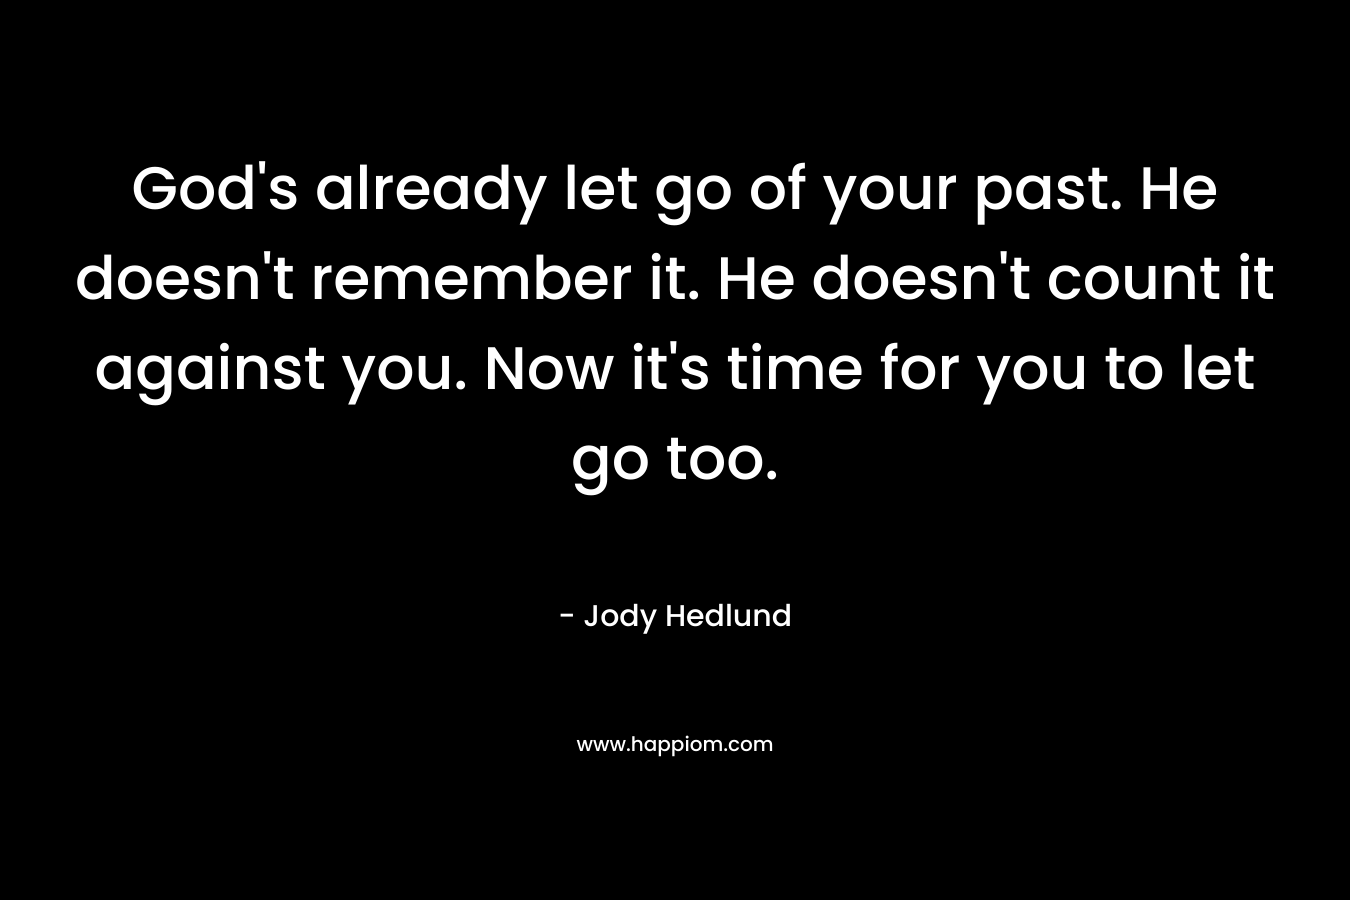 God's already let go of your past. He doesn't remember it. He doesn't count it against you. Now it's time for you to let go too.